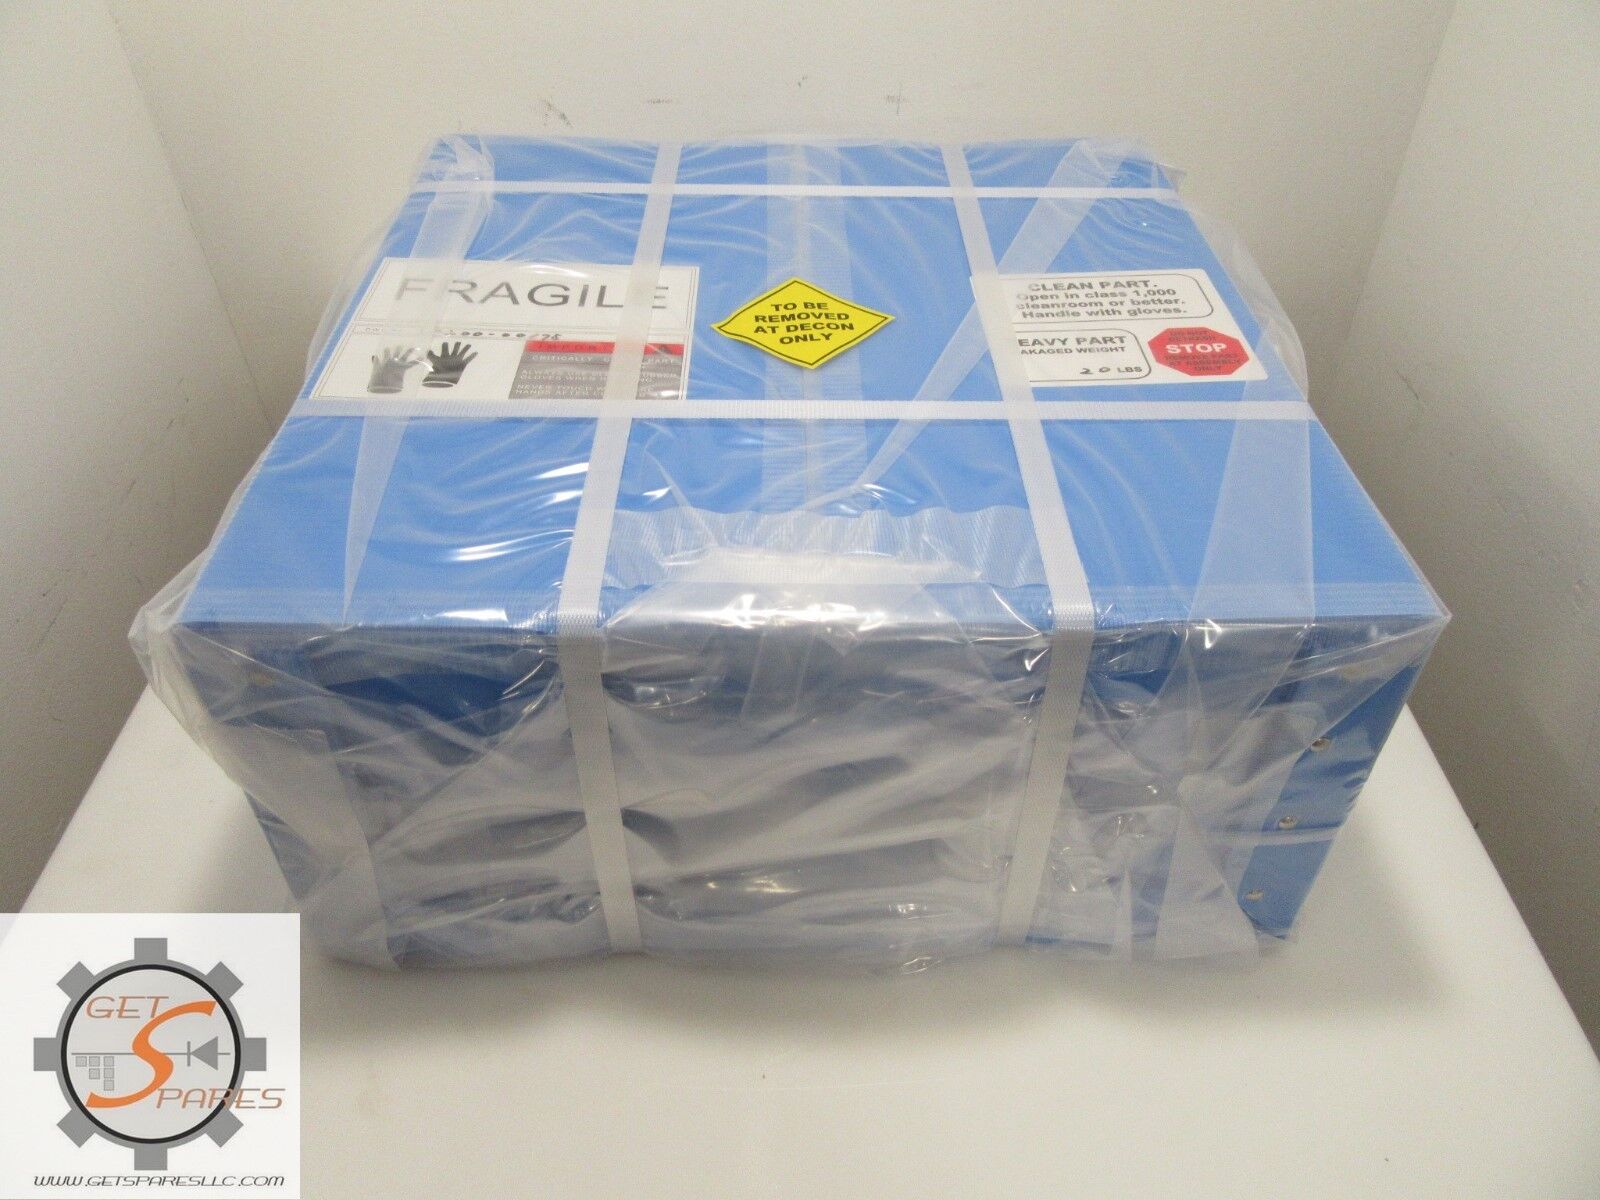 0200-00175 / AMAT DOME CERAMIC, POLY DPS CHAMBER/ APPLIED MATERIALS